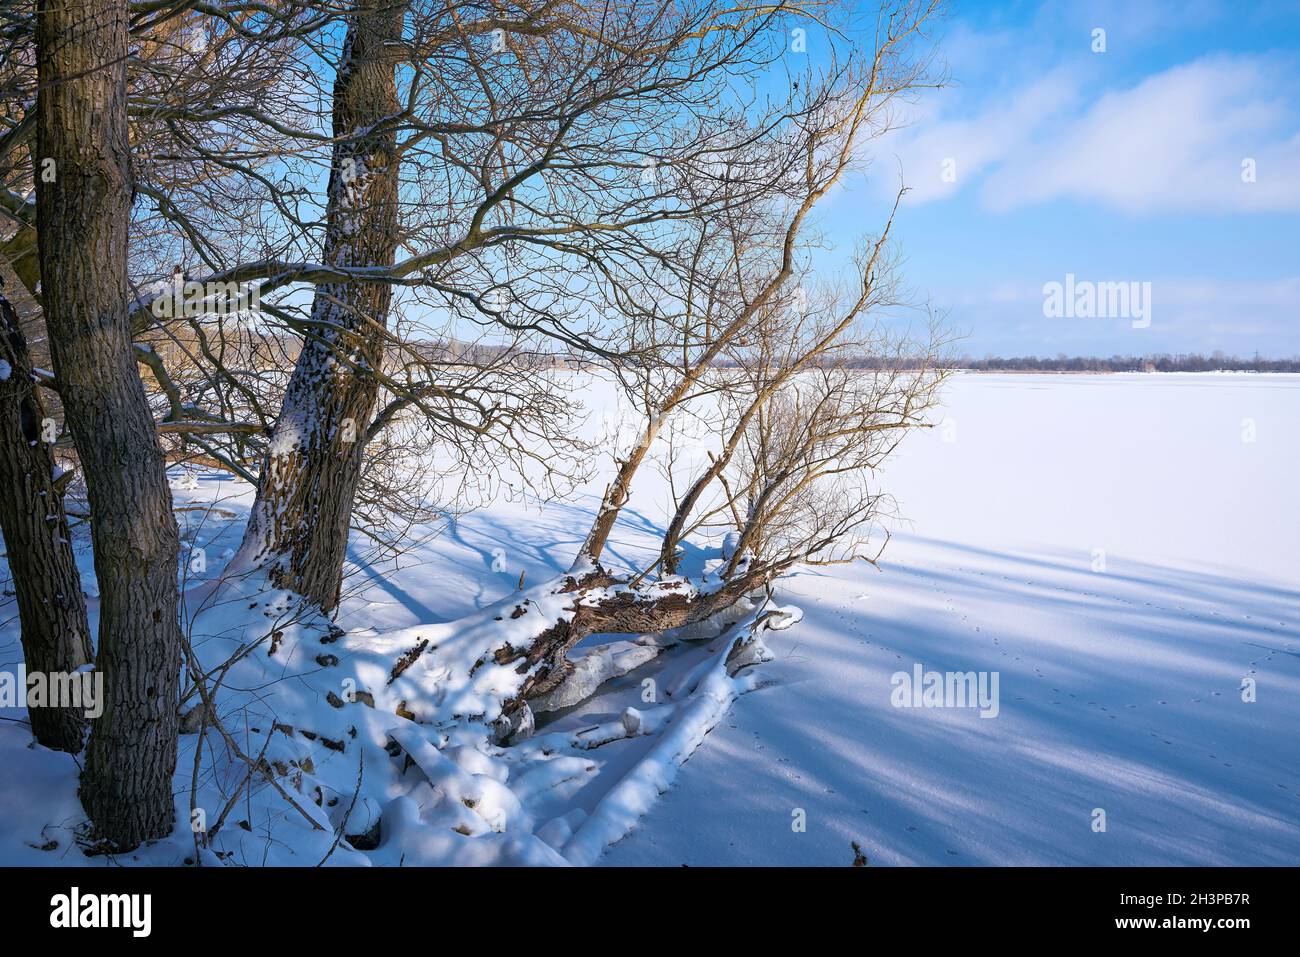 Snowy Landscape with trees in winter at lake Barleber See near Magdeburg in Germany Stock Photo